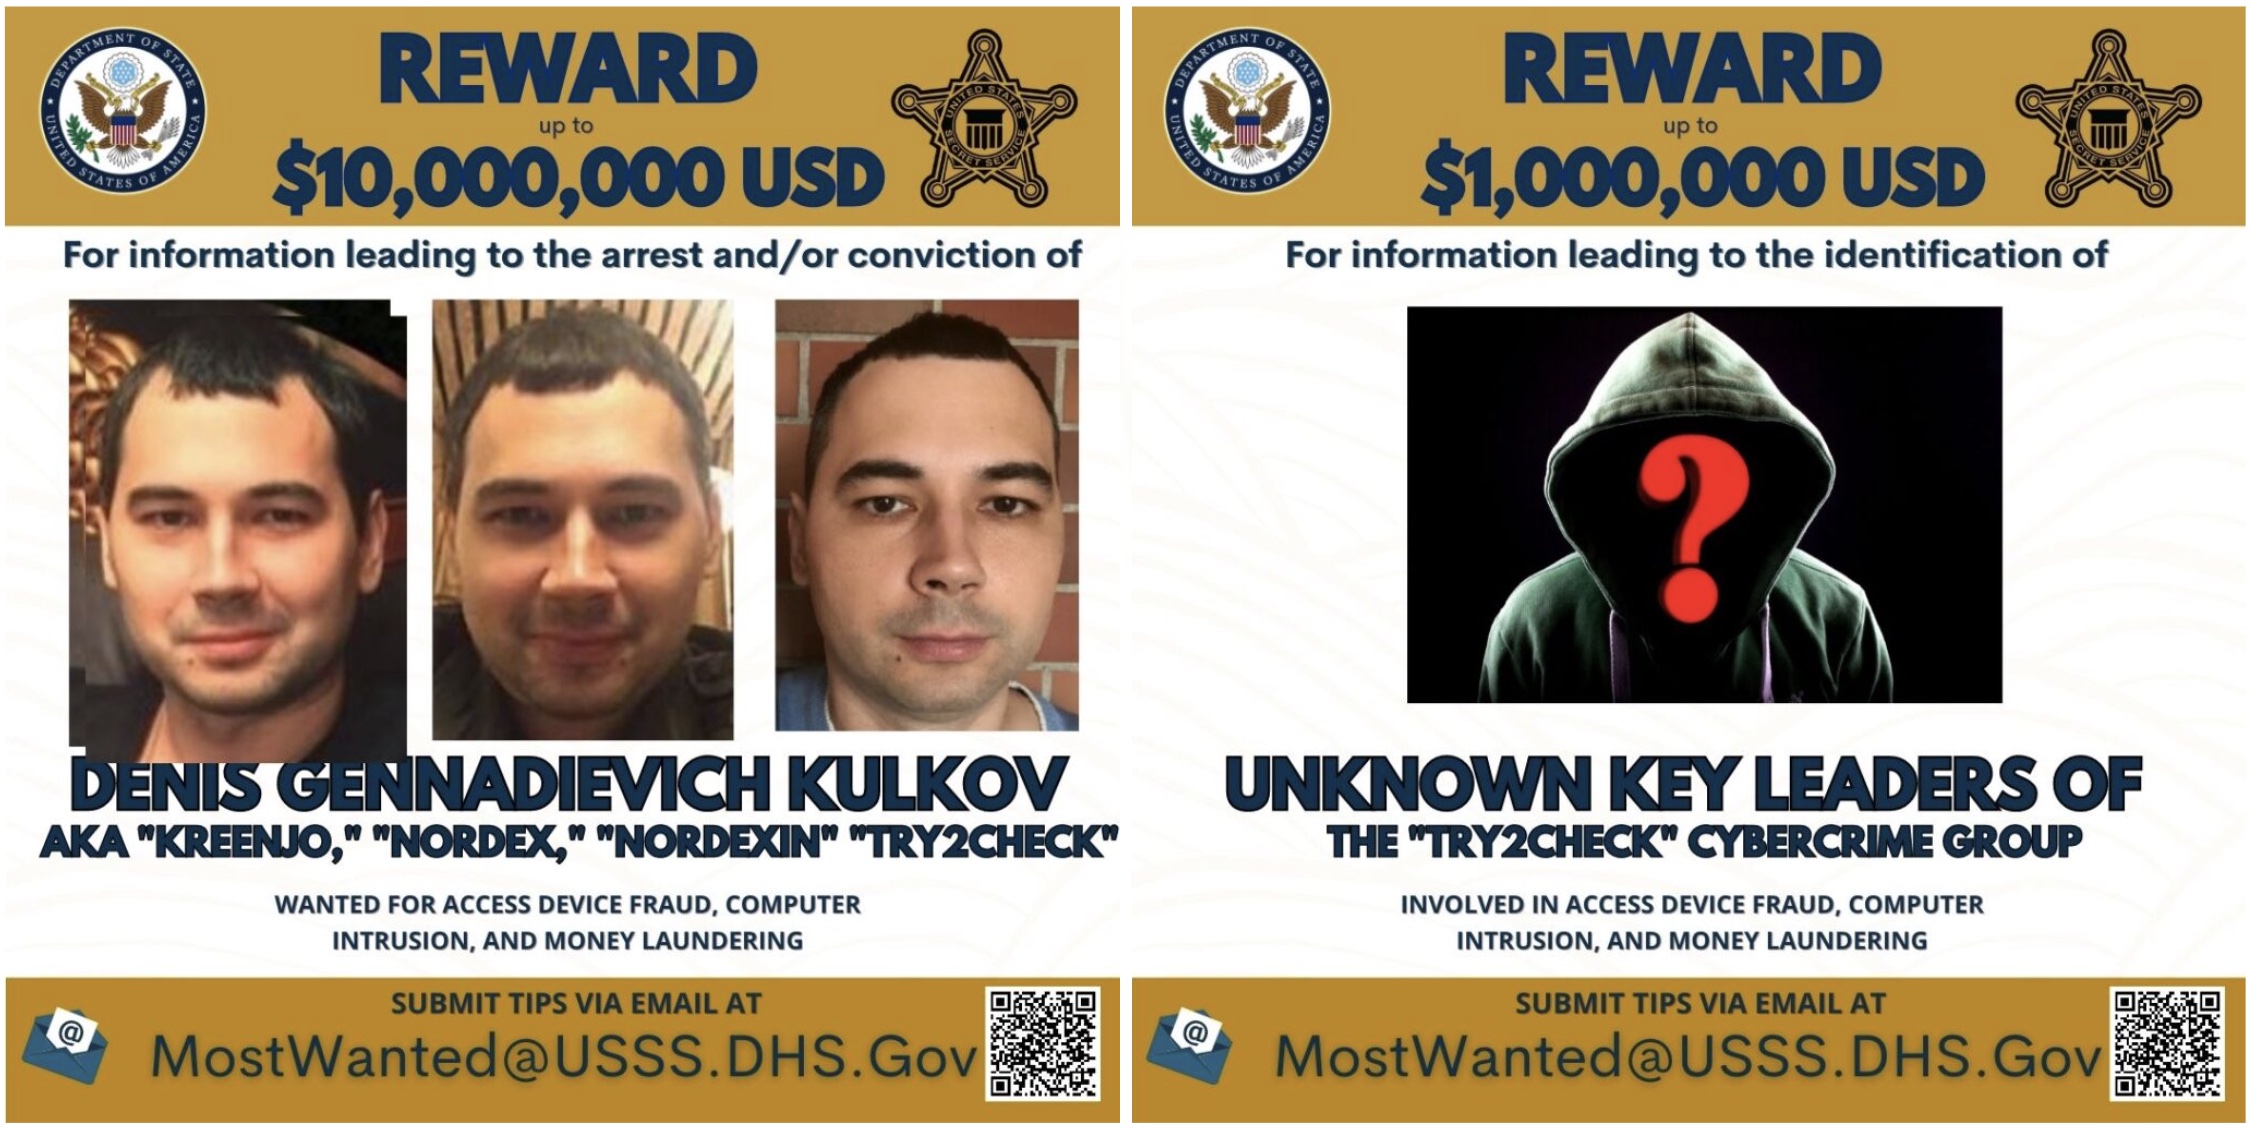 A photo of Denis Gennadievich Kulkov, the main suspect in the Try2Check credit card scheme, as pictured on a State Department "wanted" photo.